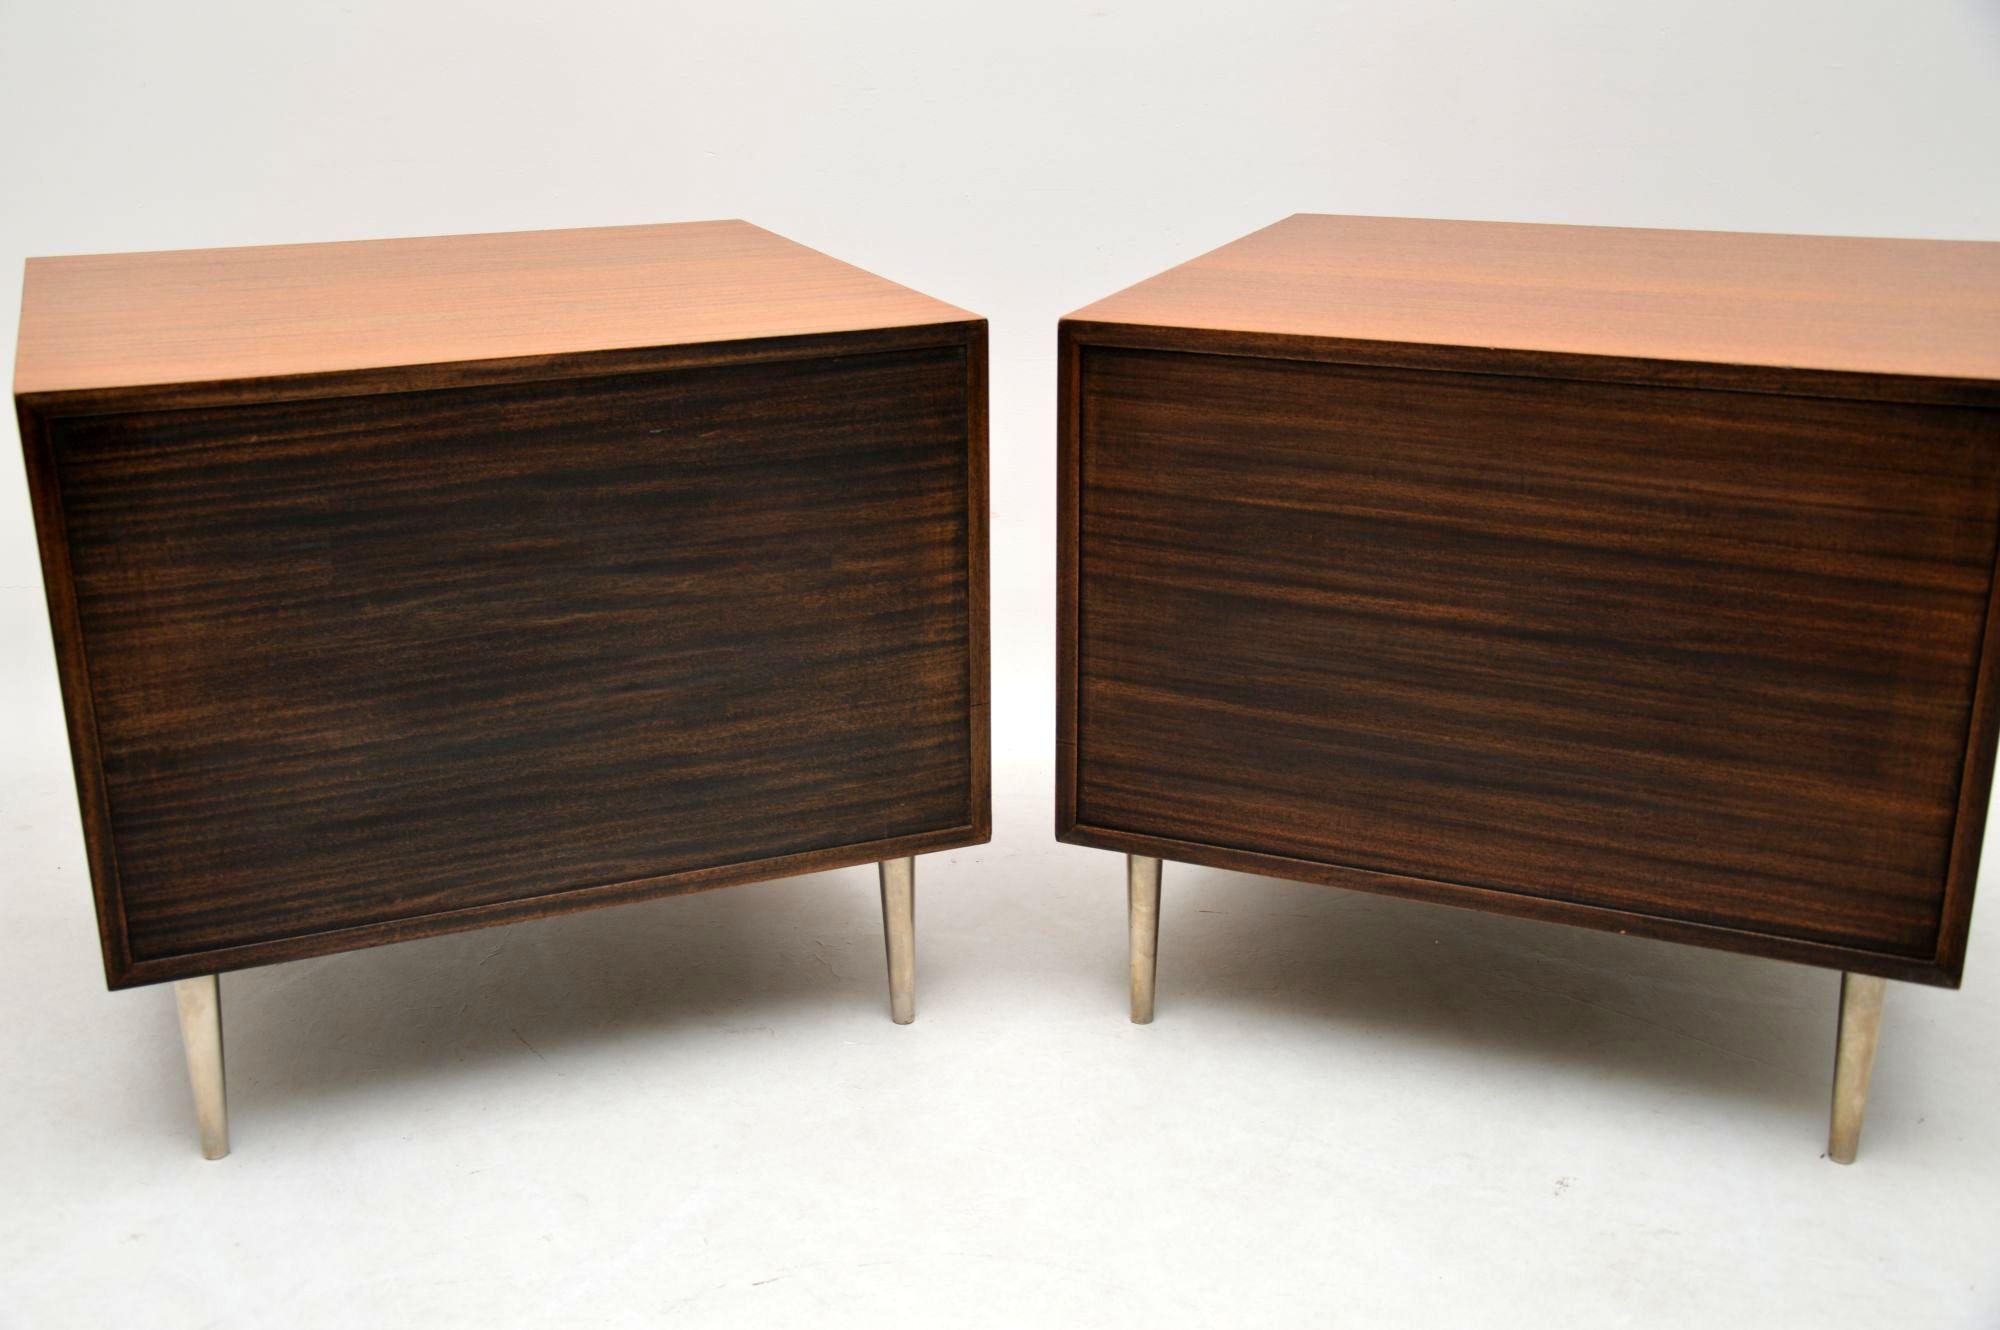 1960's Pair of Vintage Chests by Edward Wormley for Dunbar For Sale 4